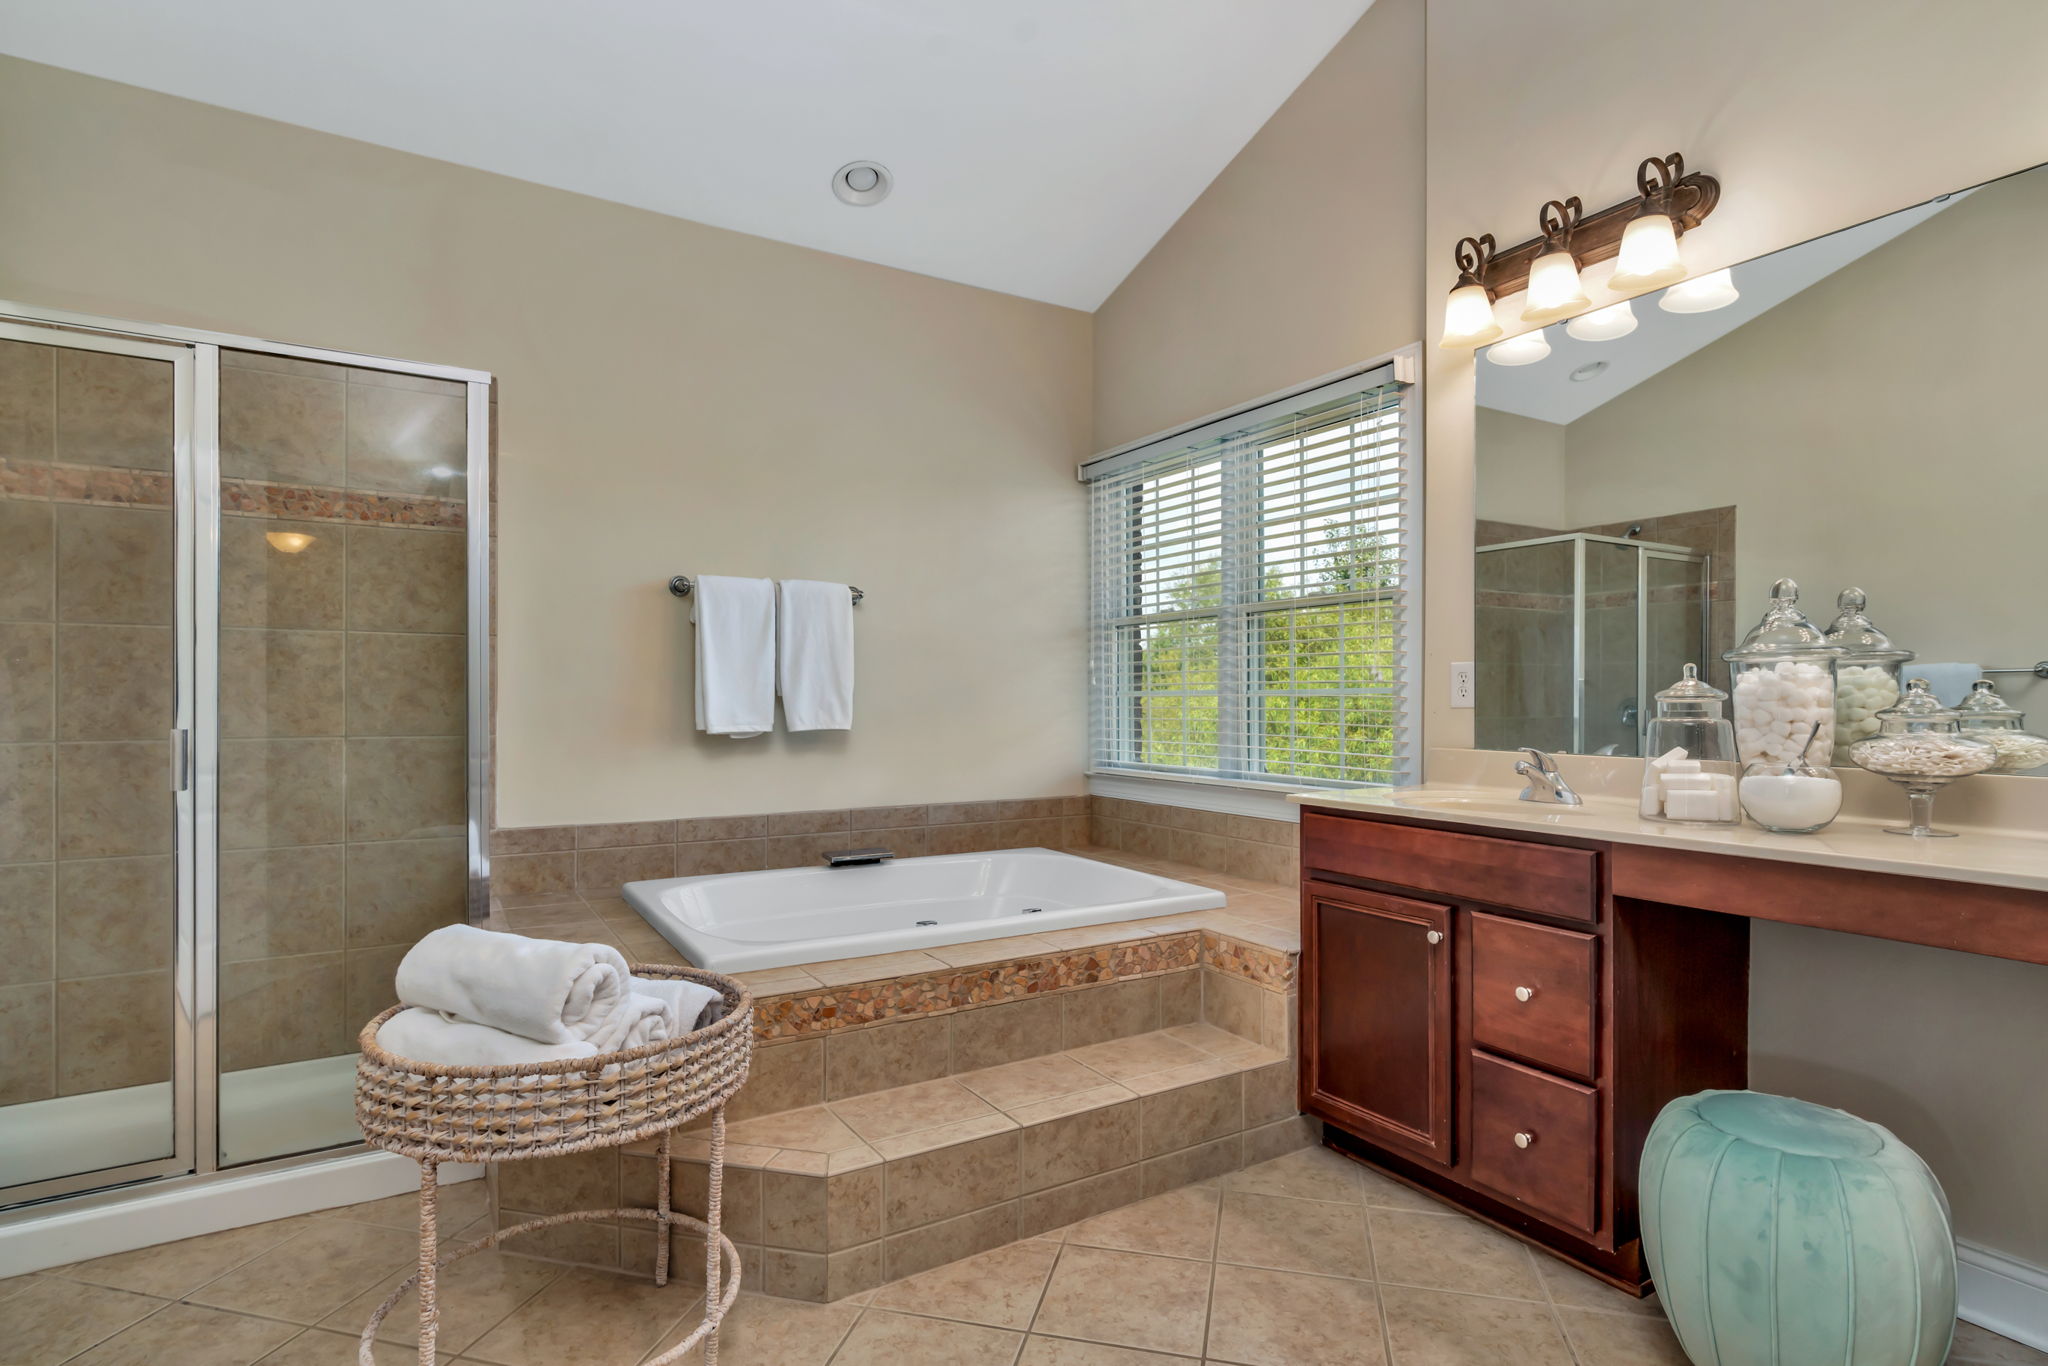 Spacious master bath with jacuzzi bath, separate shower, double vanities, linen closet and separate wc.